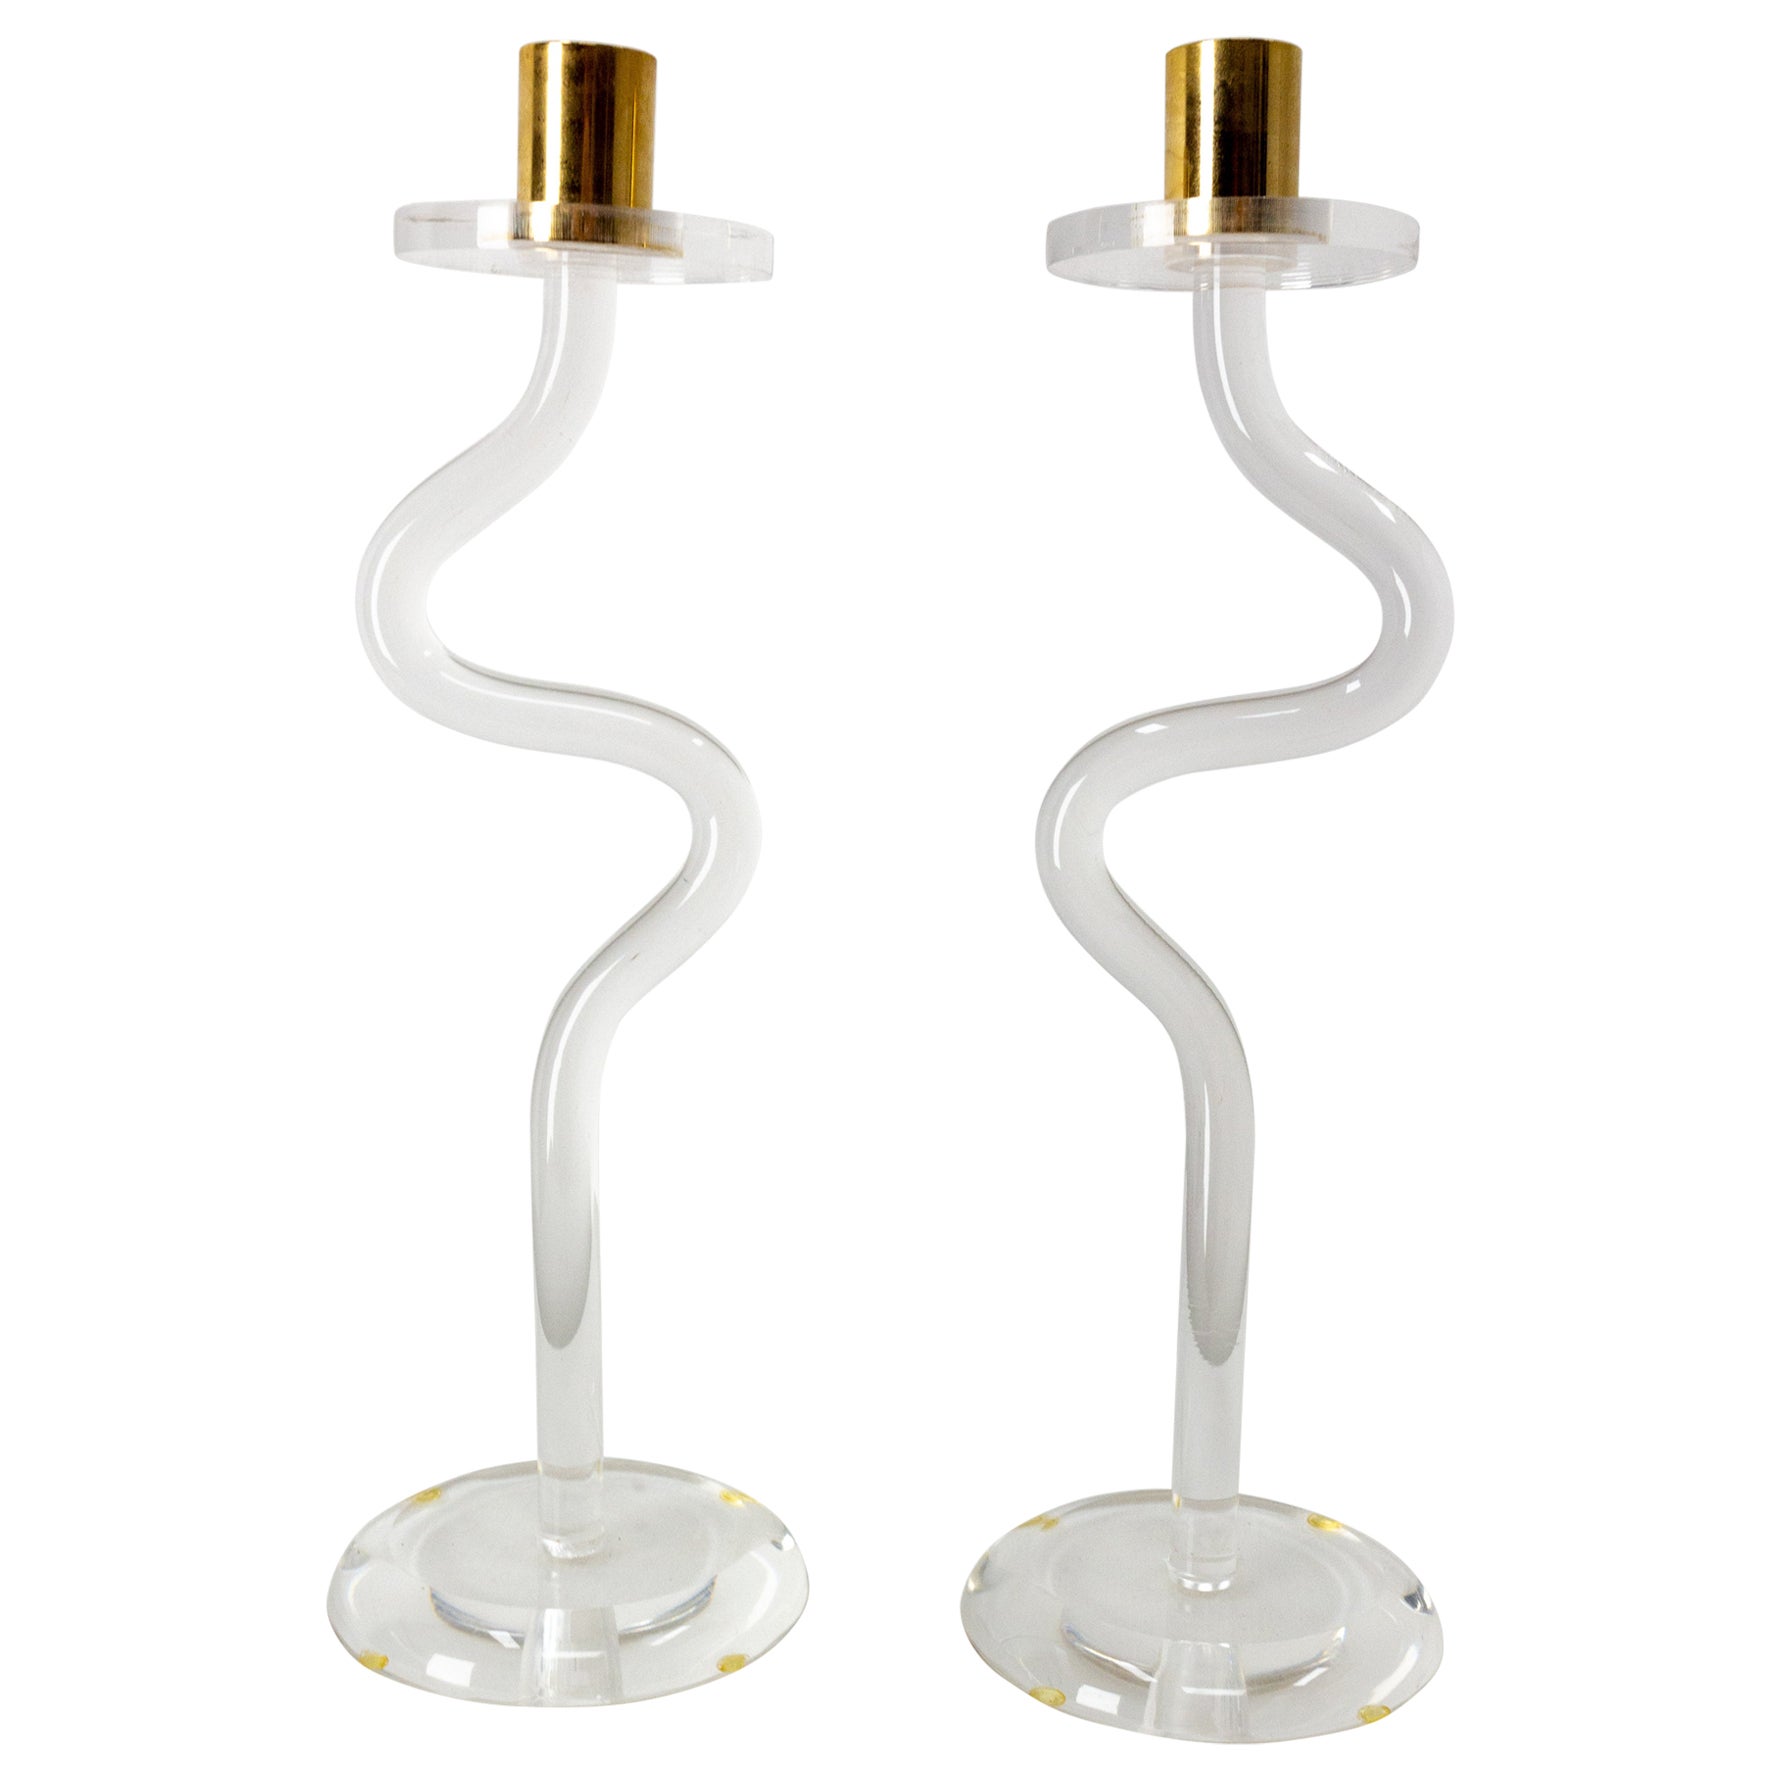 Pair of Candlesticks Polycarbonate Brass Candleholder, French, circa 1980